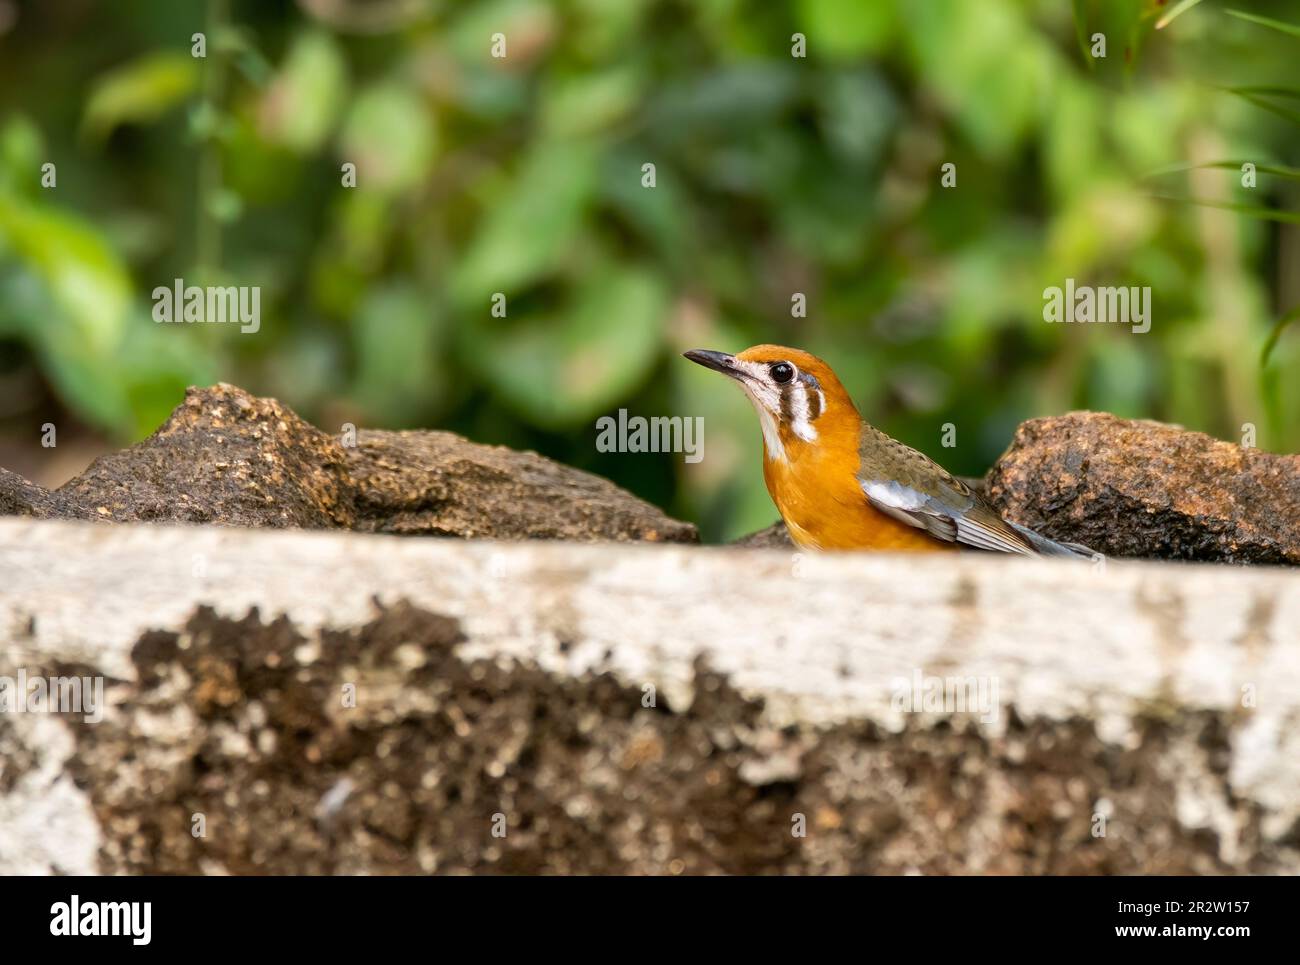 An orange-headed thrush sitting on a platform feeding on insects in the outskirts of Thattekad, Kerala Stock Photo